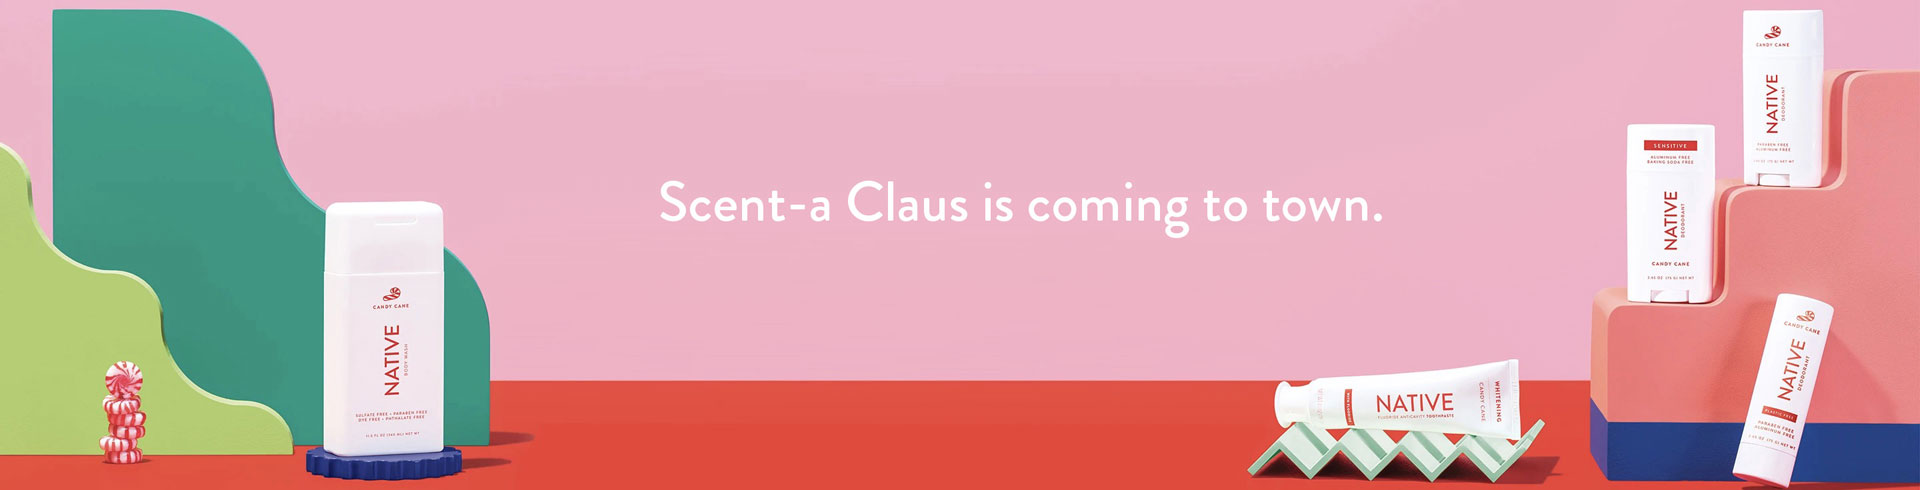 Native's "Scent-a Claus is coming to town." campaign.